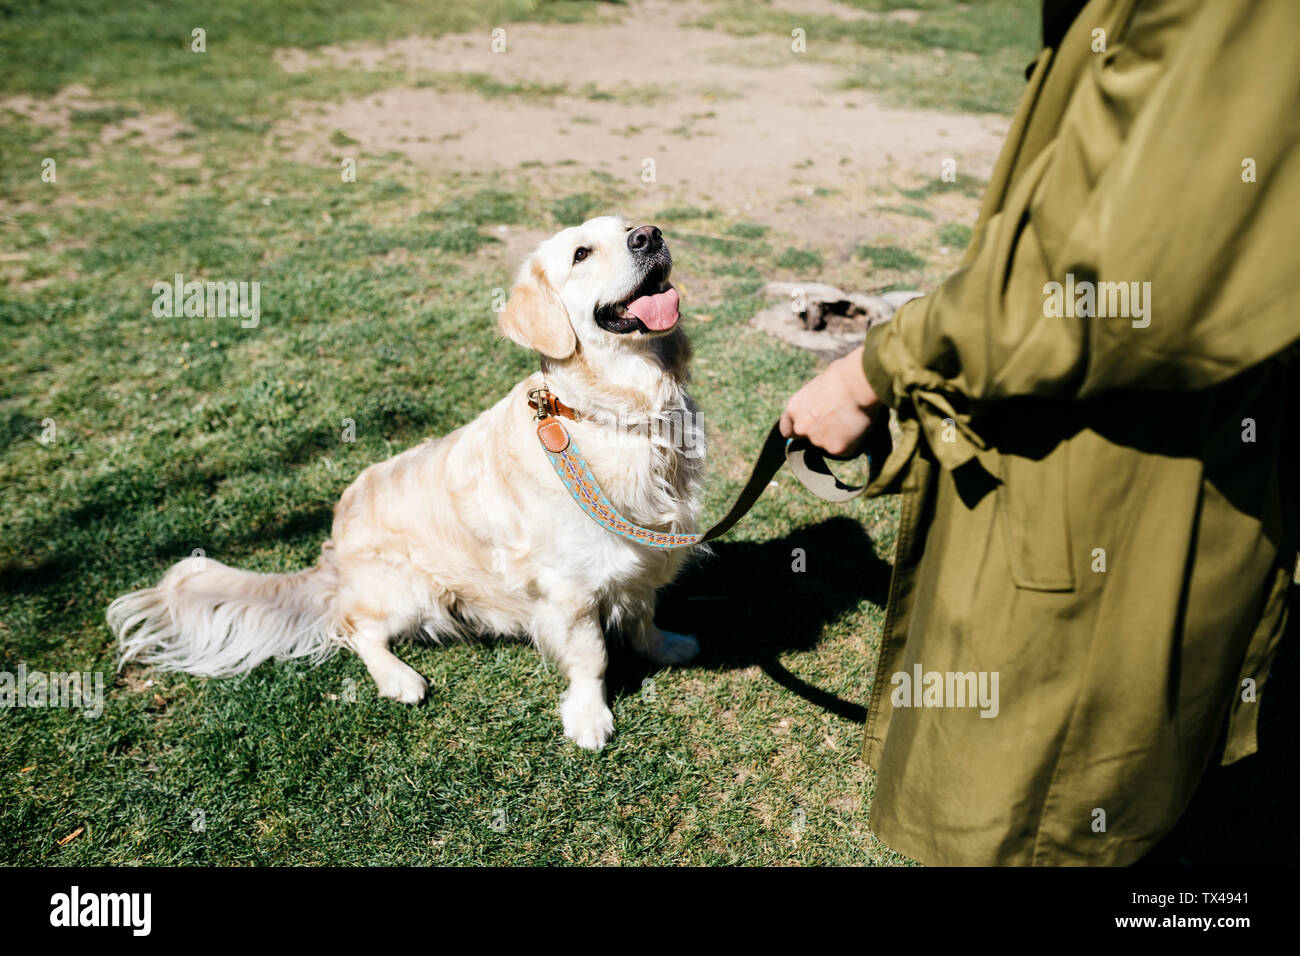 Labrador Retriever sitting on a meadow paying attention to owner Stock Photo